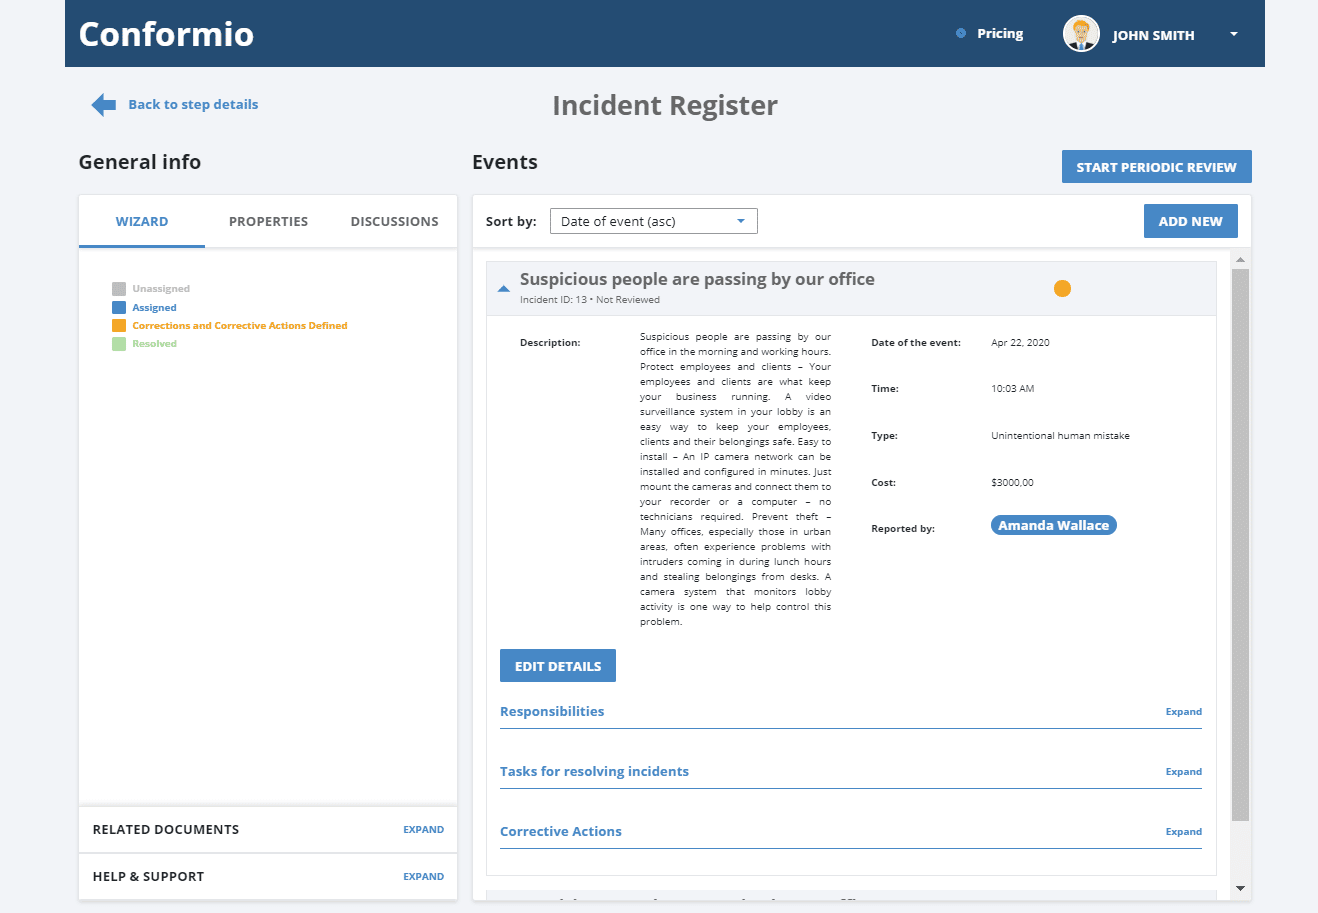 View of an Incident Register in Conformio